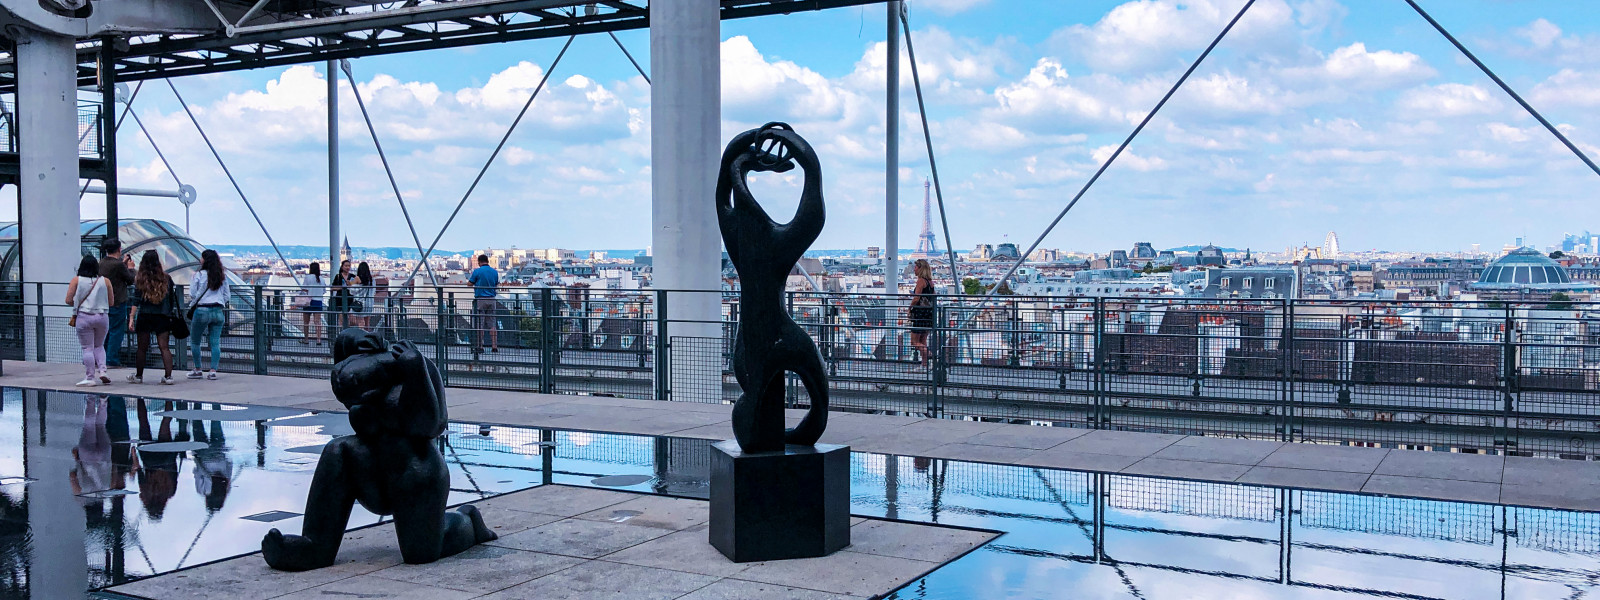 Looking out from a sculpture garden within the Centre Pompidou, one can see the Eiffel Tower.